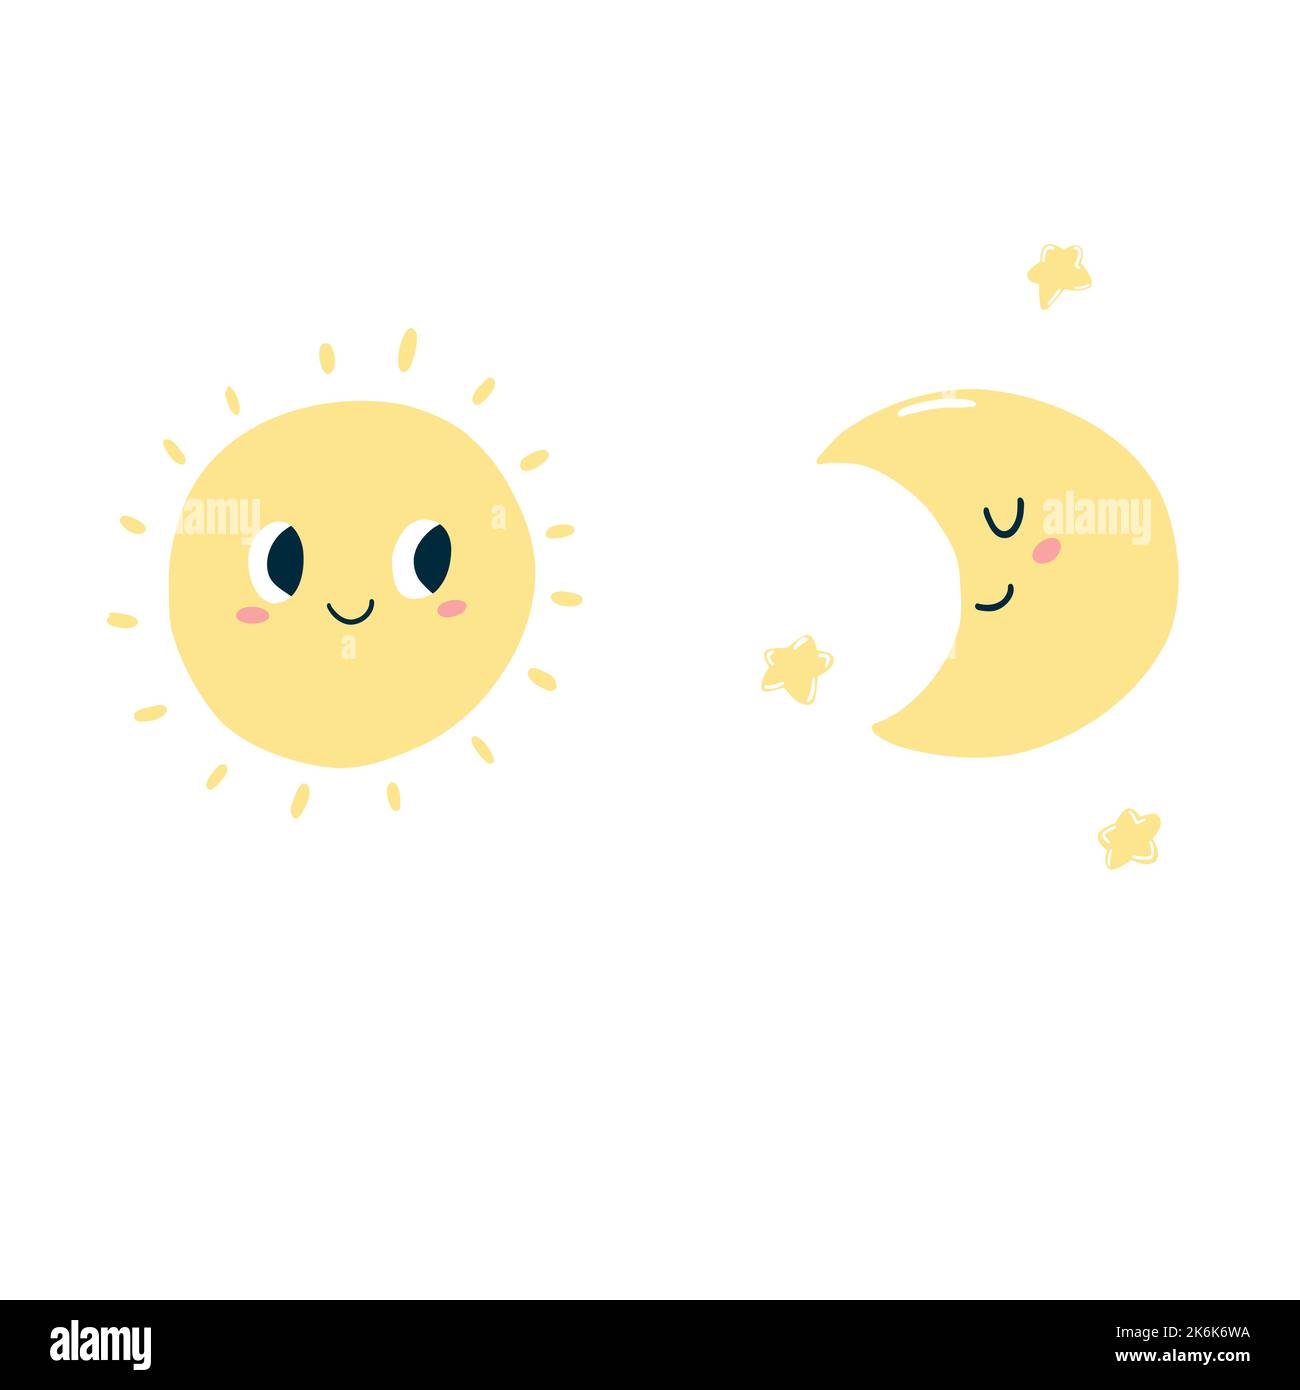 Cute kawaii sun, moon and stars in cartoon flat style. Vector illustration of kids icon with happy face for poster, fabric print, card, kids apparel. Stock Vector